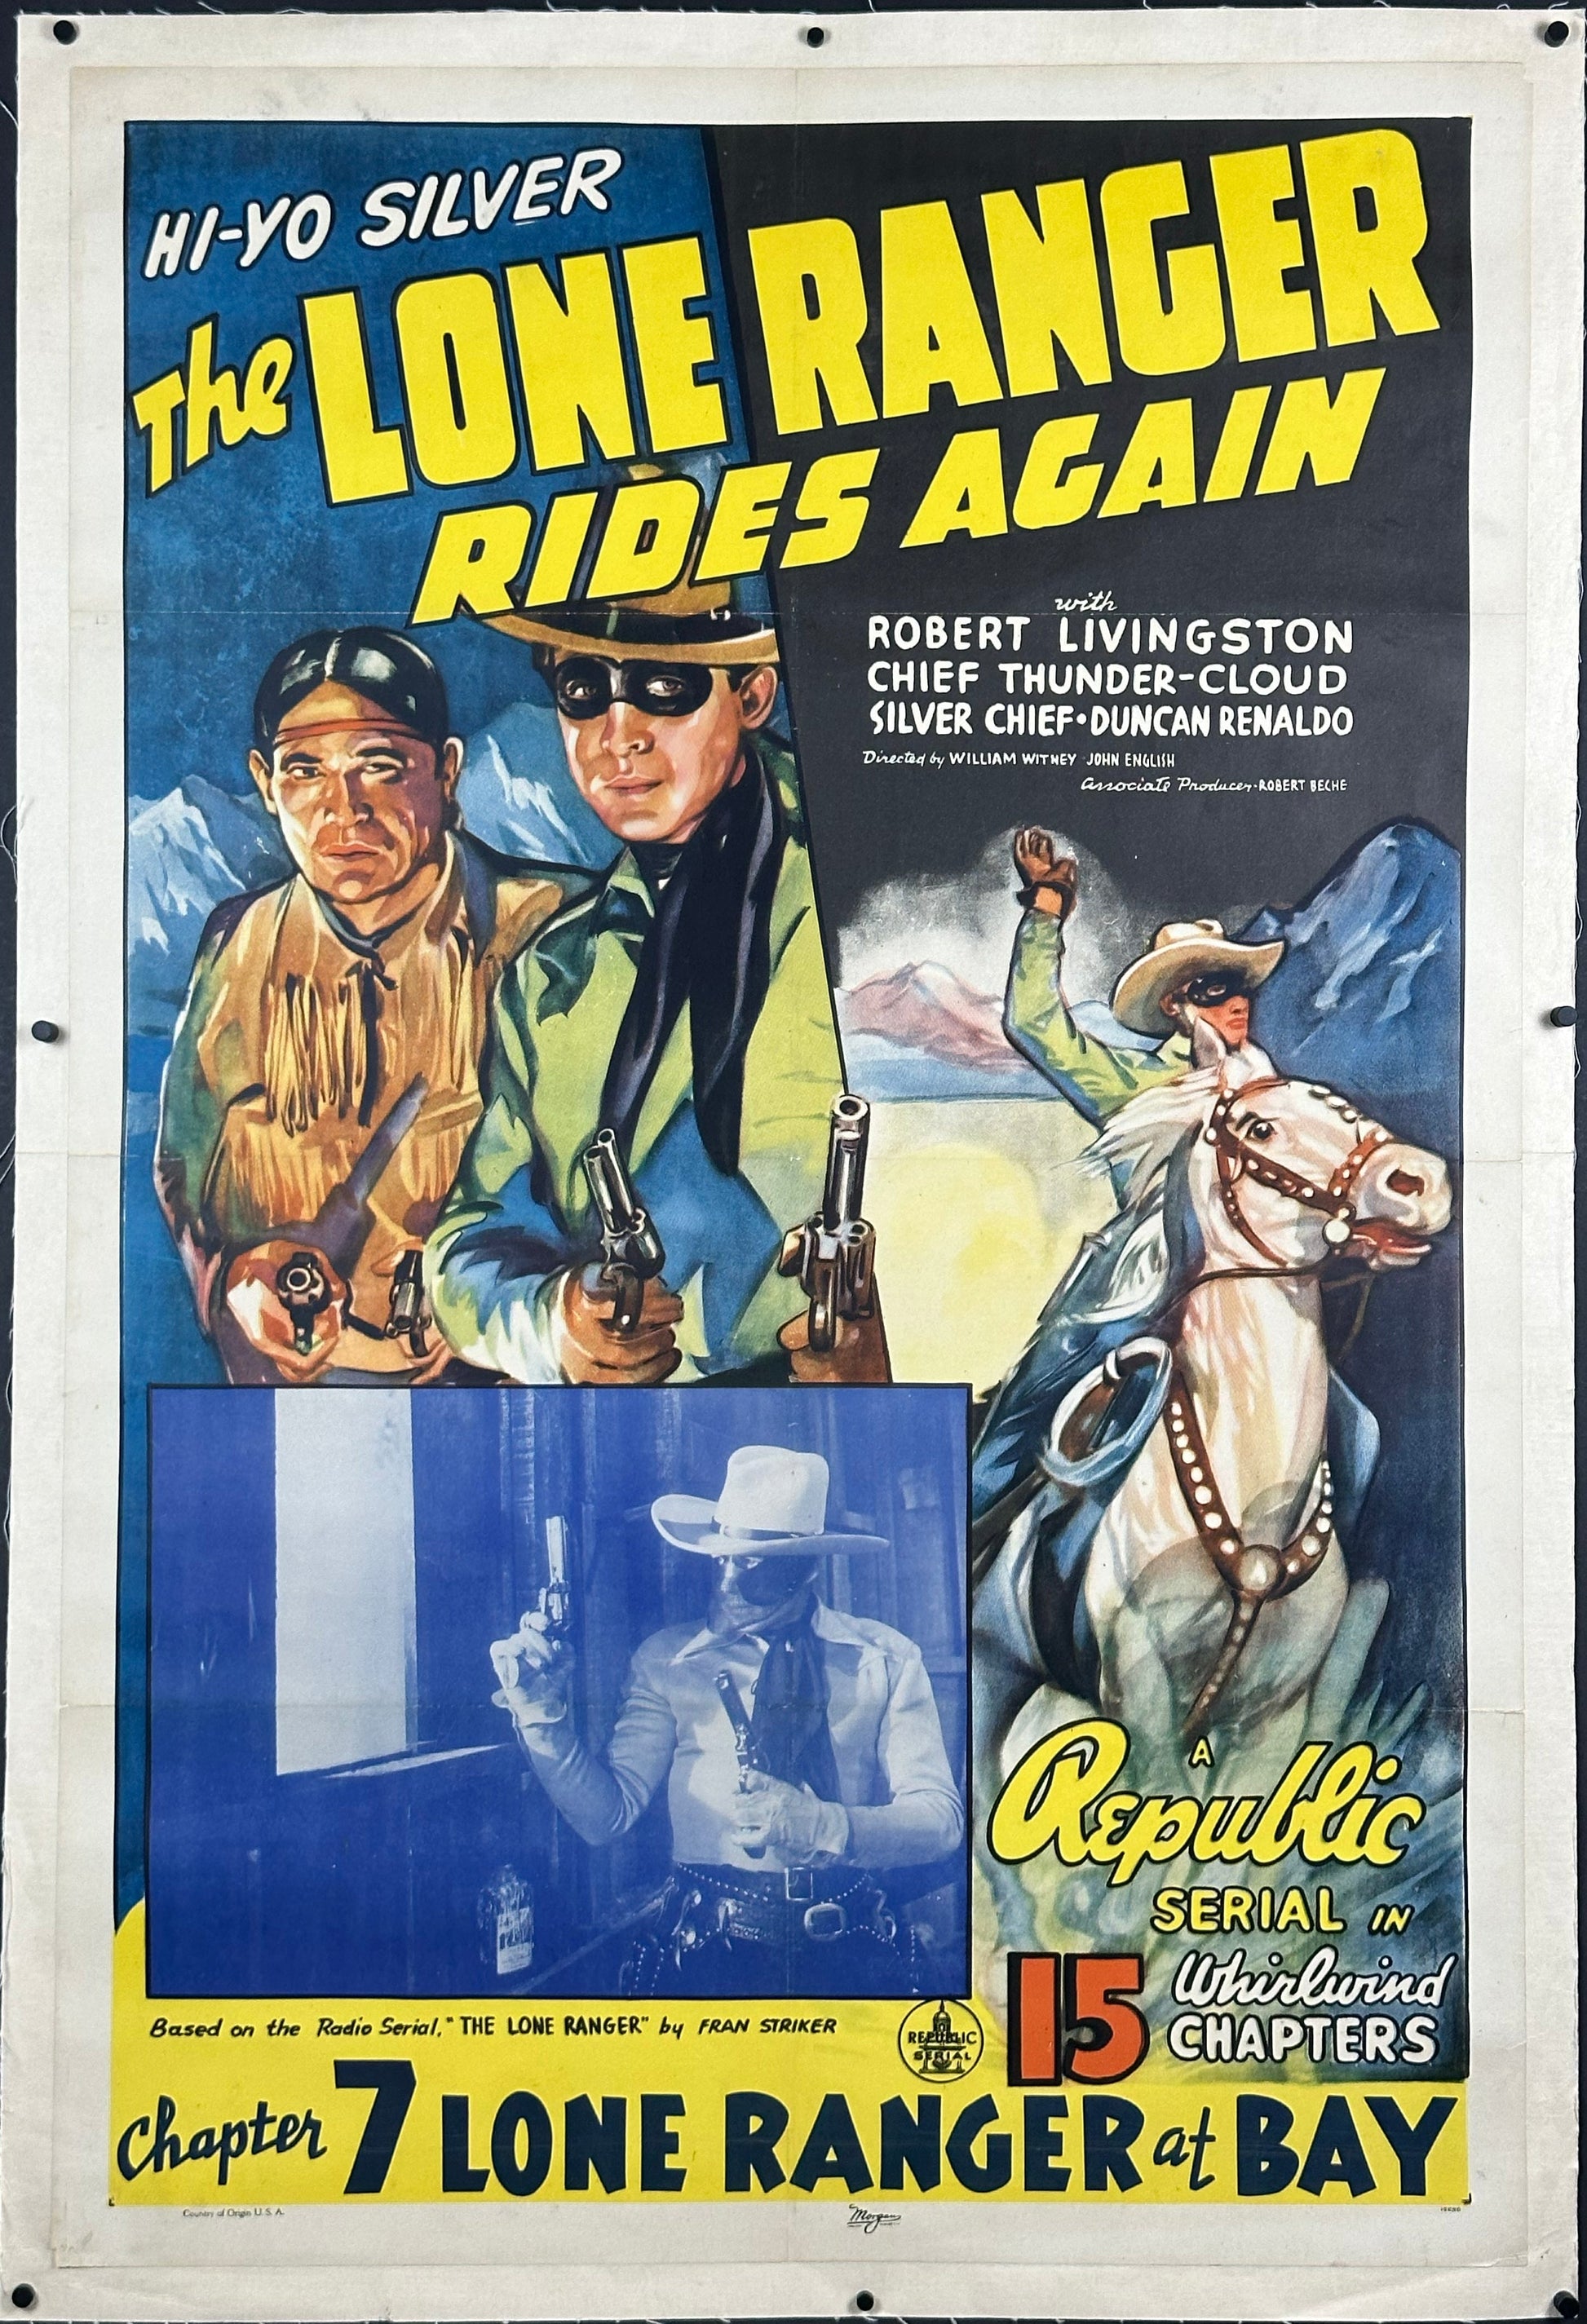 The Lone Ranger Rides Again US One Sheet "Chapter 7" (1939) - ORIGINAL RELEASE - posterpalace.com